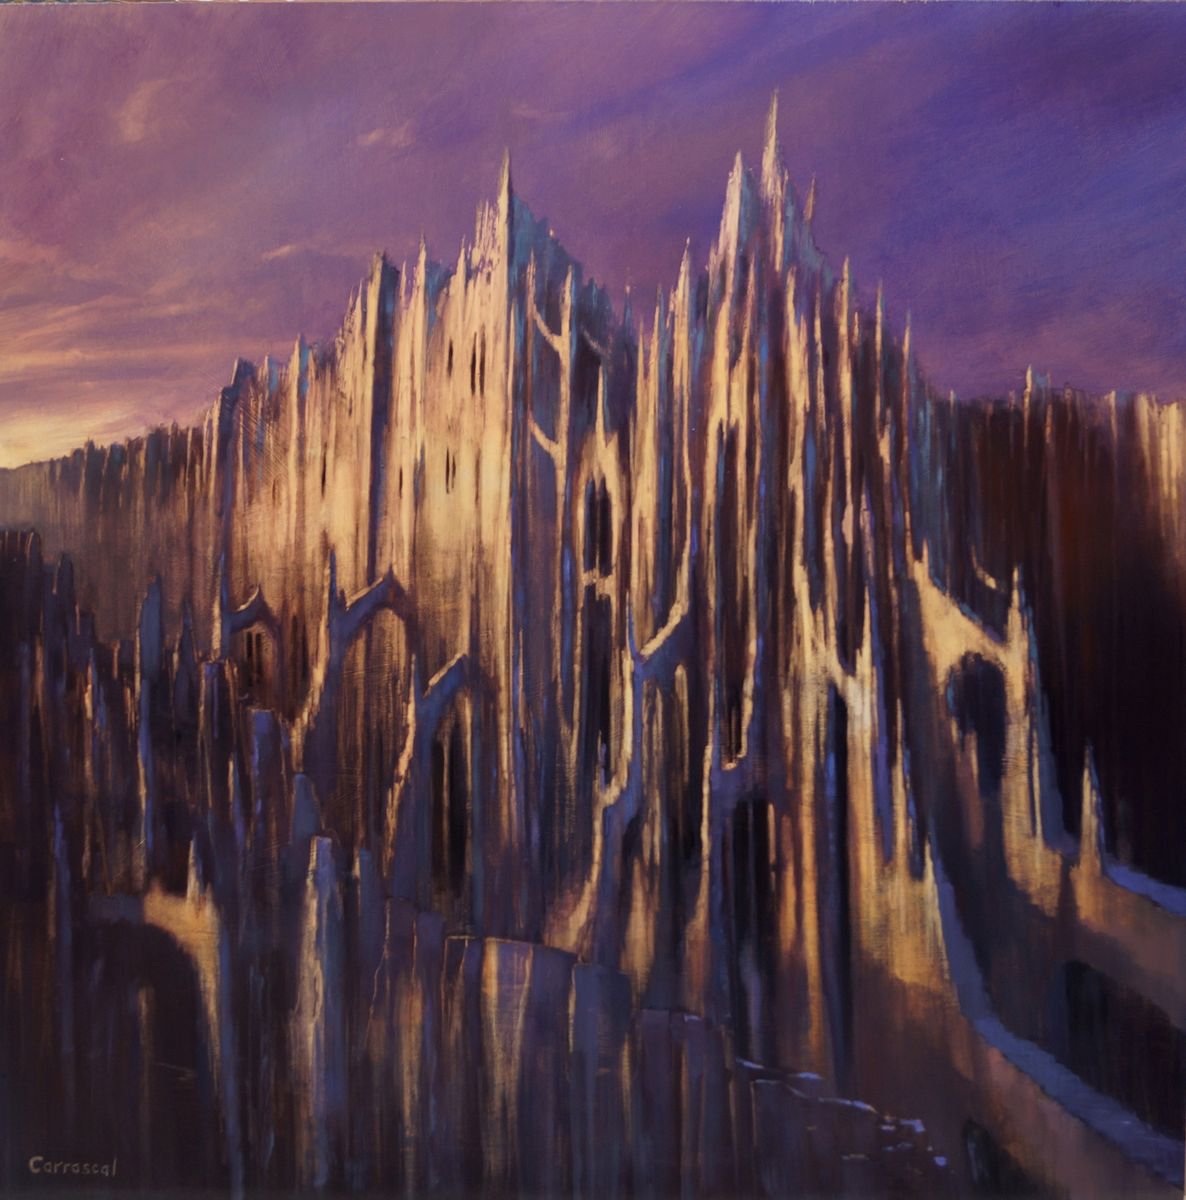 GOTHIC NATURE. Large painting 110x110cm by Rafael Carrascal